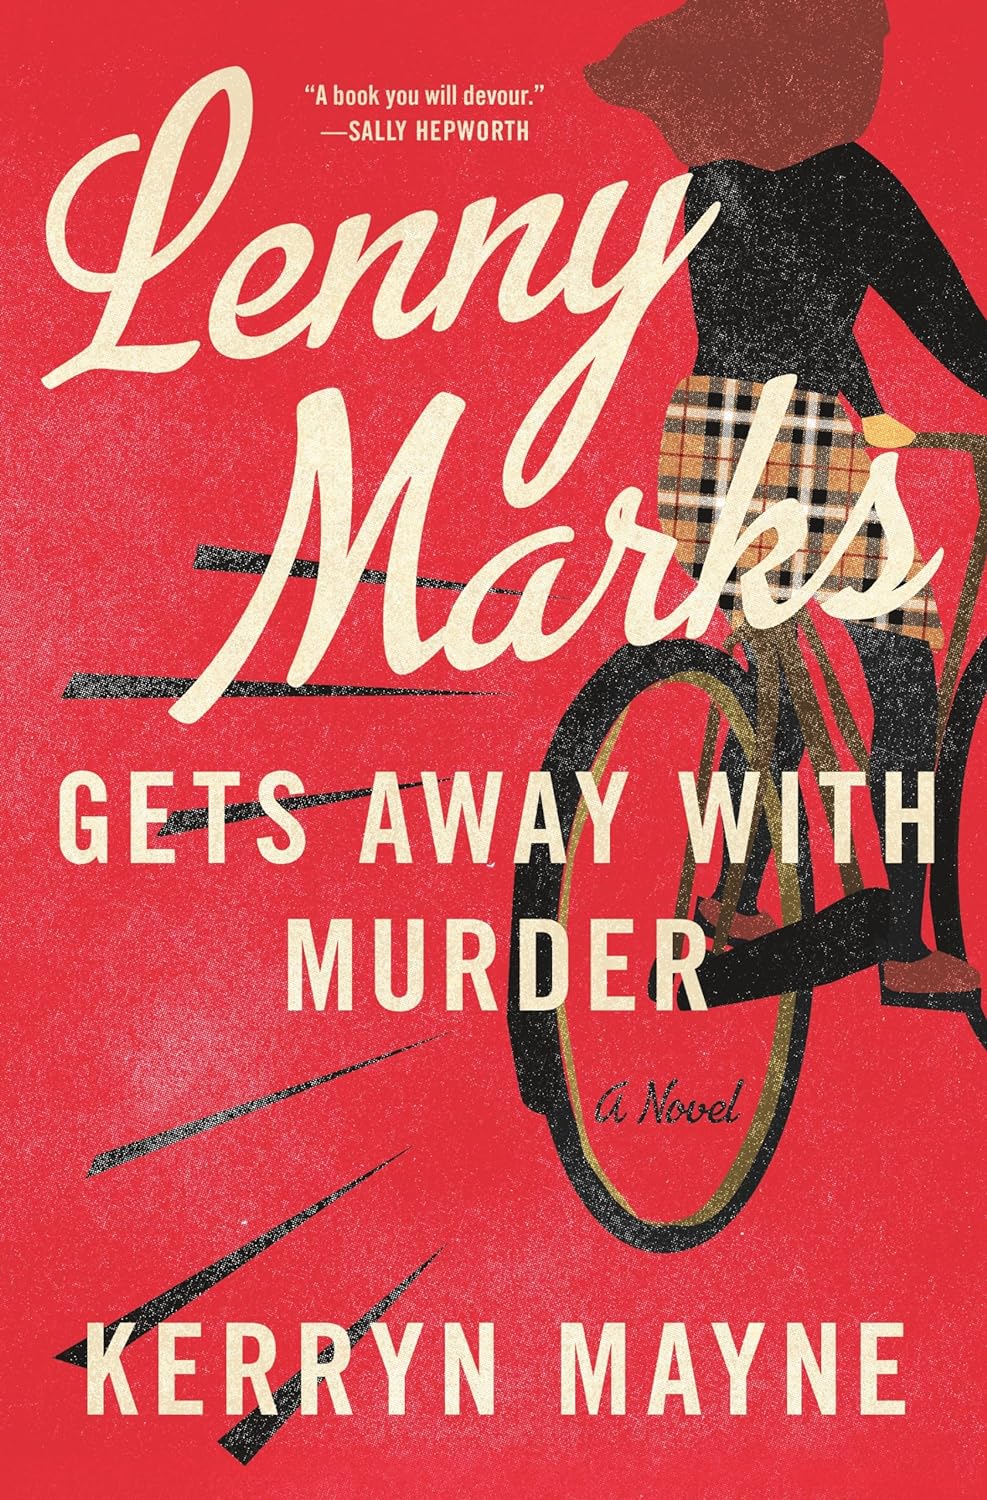 Image for "Lenny Marks Gets Away with Murder"